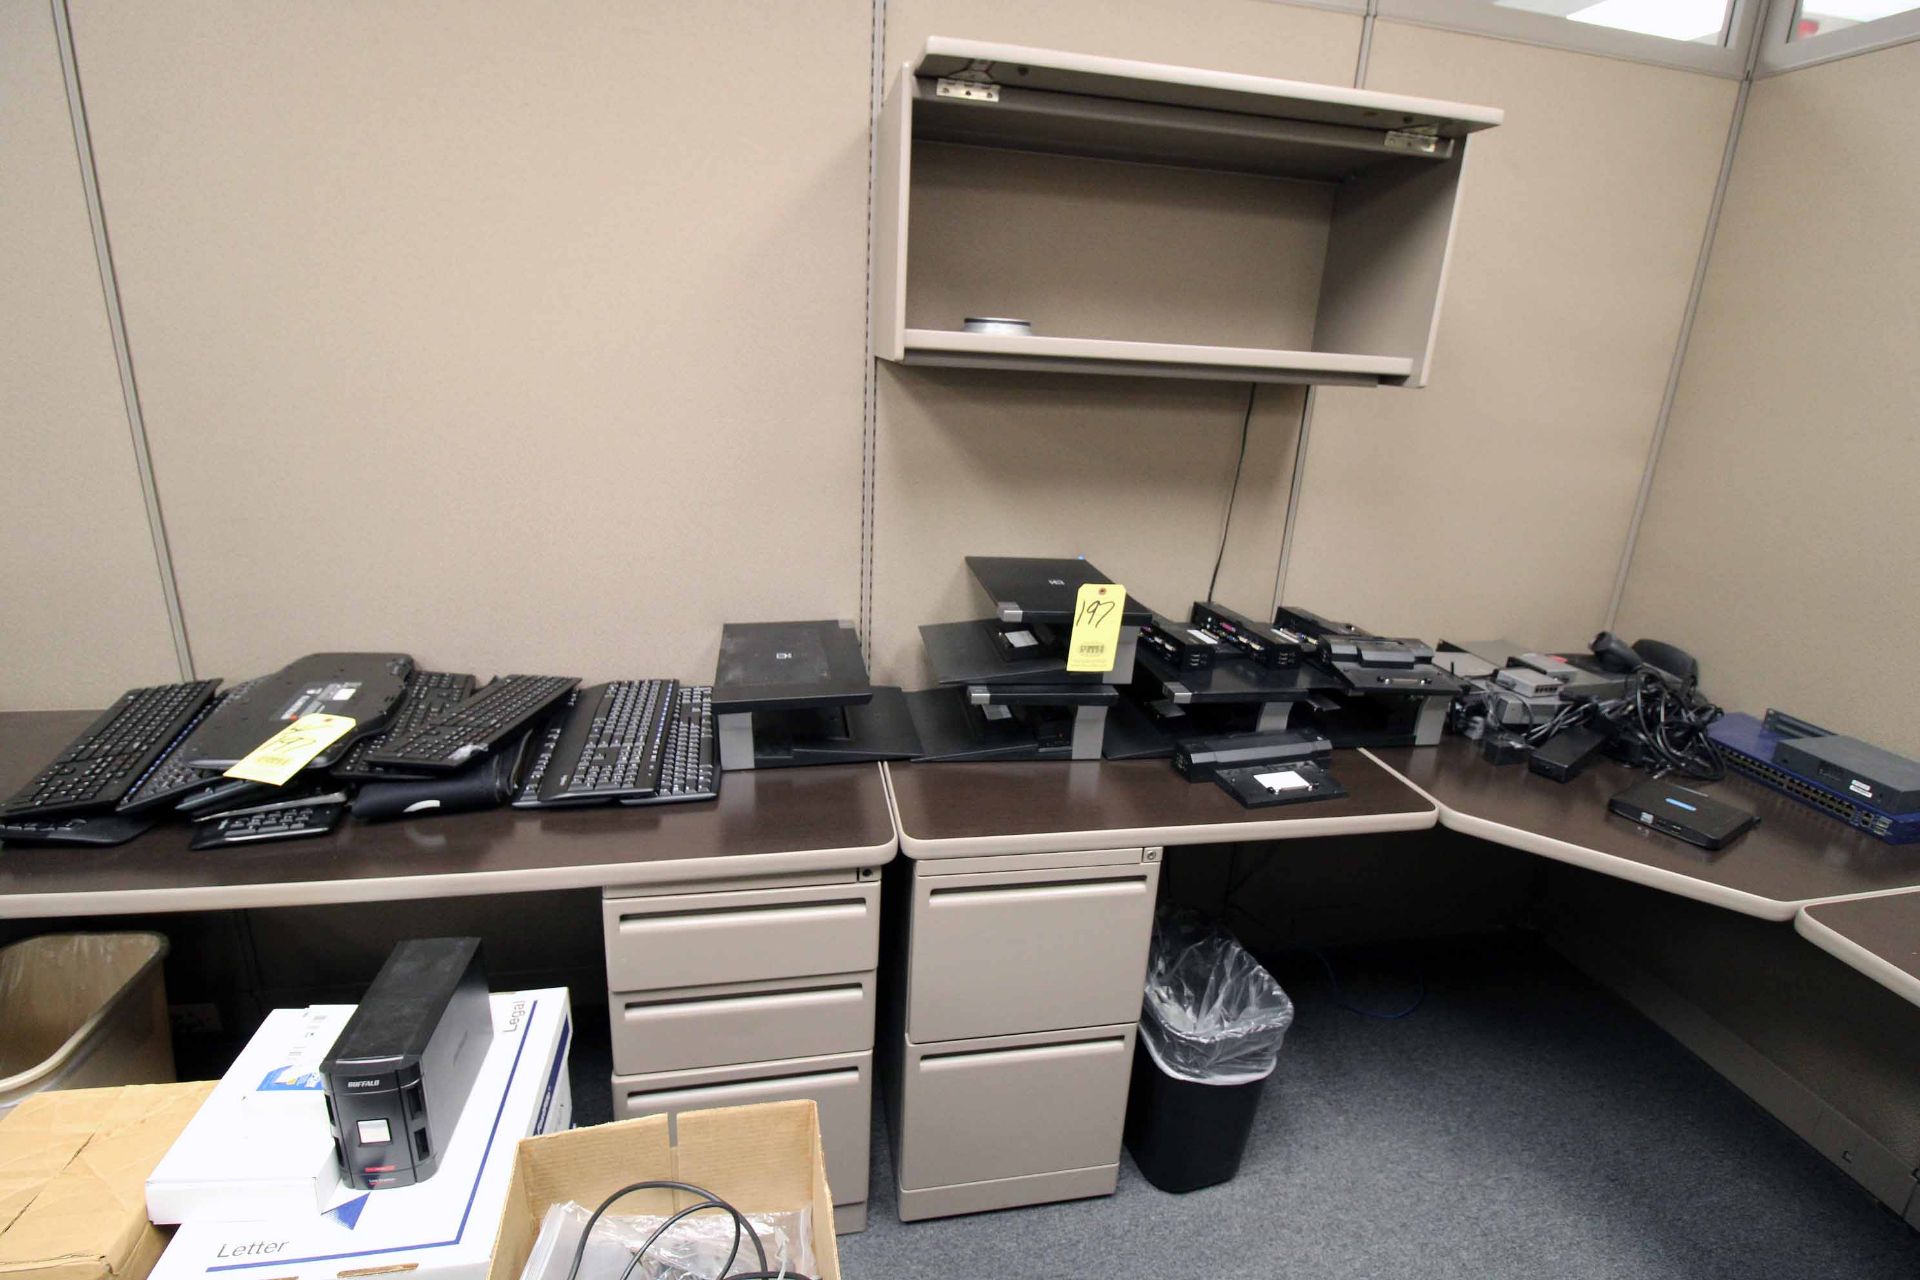 LOT CONSISTING OF: Dell docking stations, Cisco & Netgear switches & keyboards (Located at: Emco